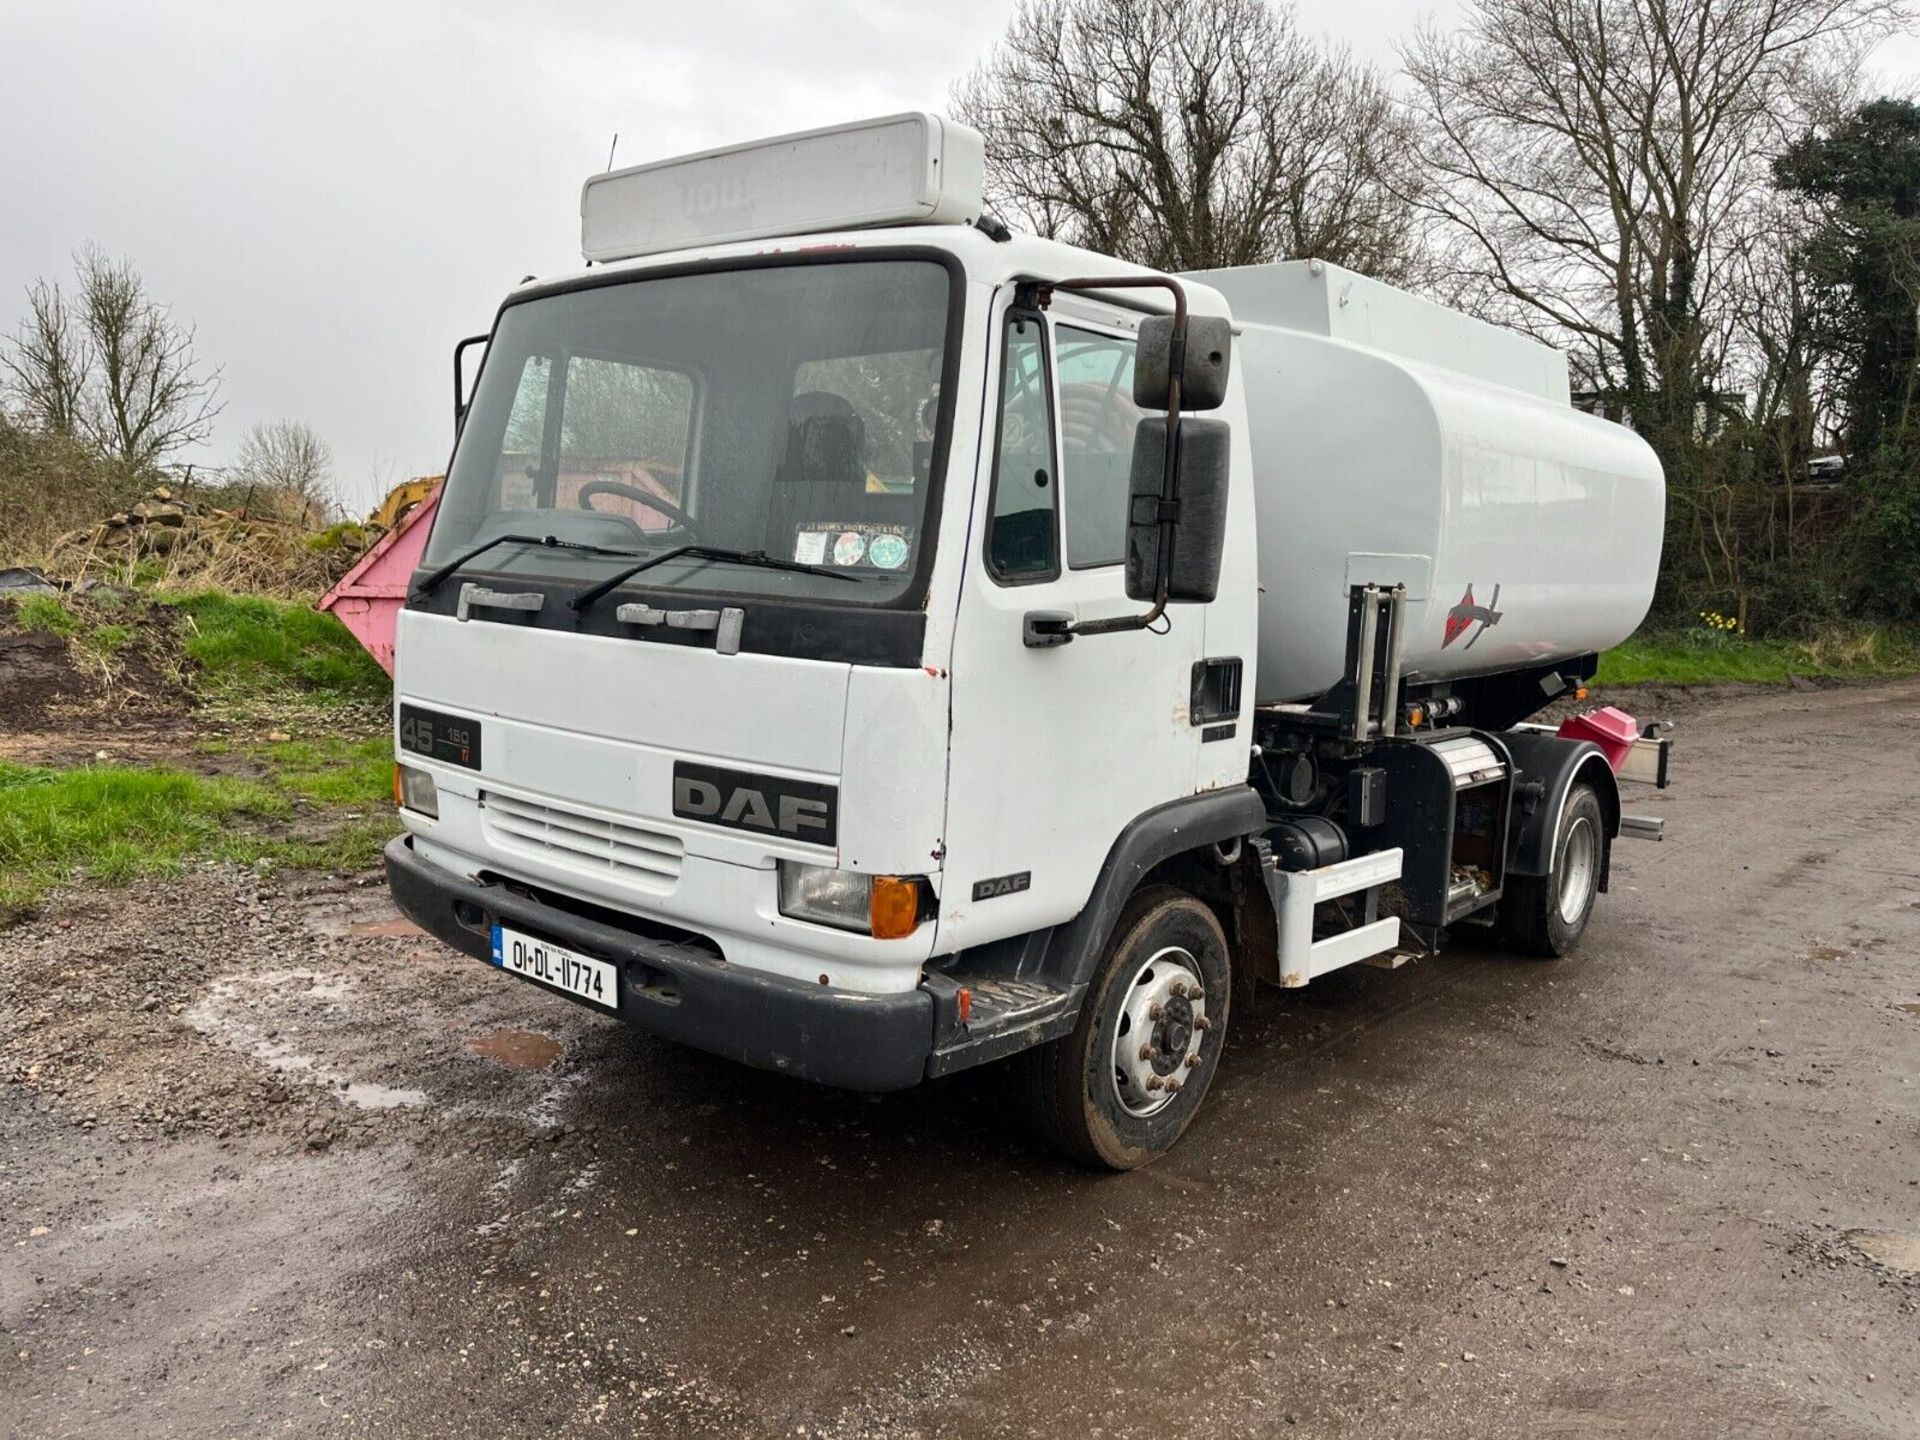 STURDY AND READY: LEYLAND DAF FA45.150 TANKER, 8 STUD AXLES - Image 20 of 21